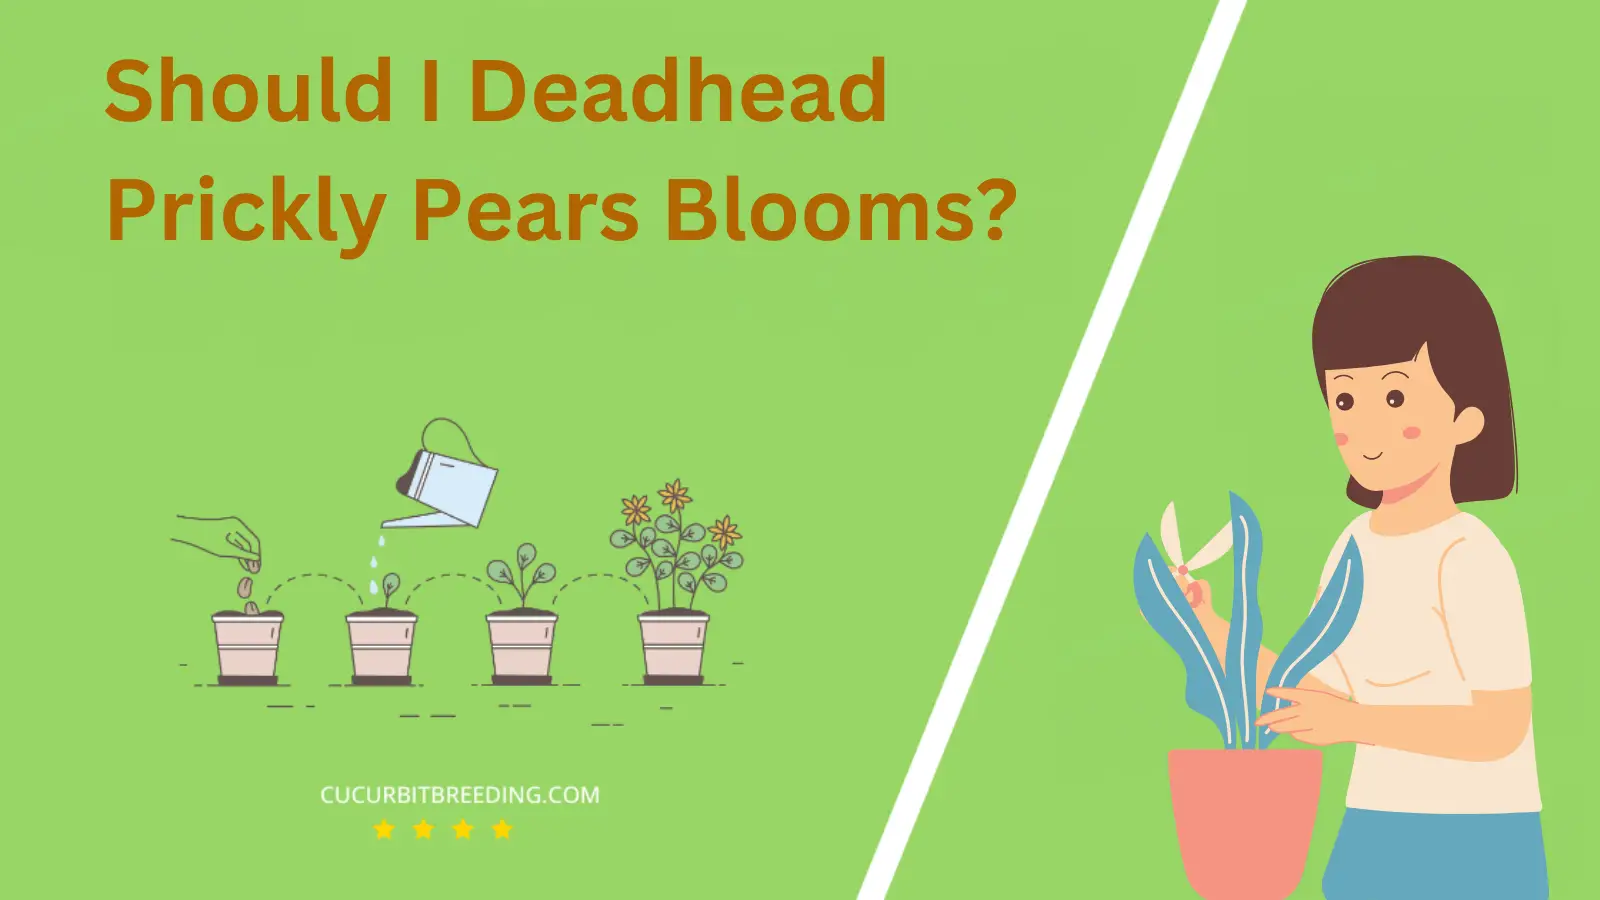 Should I Deadhead Prickly Pears Blooms?